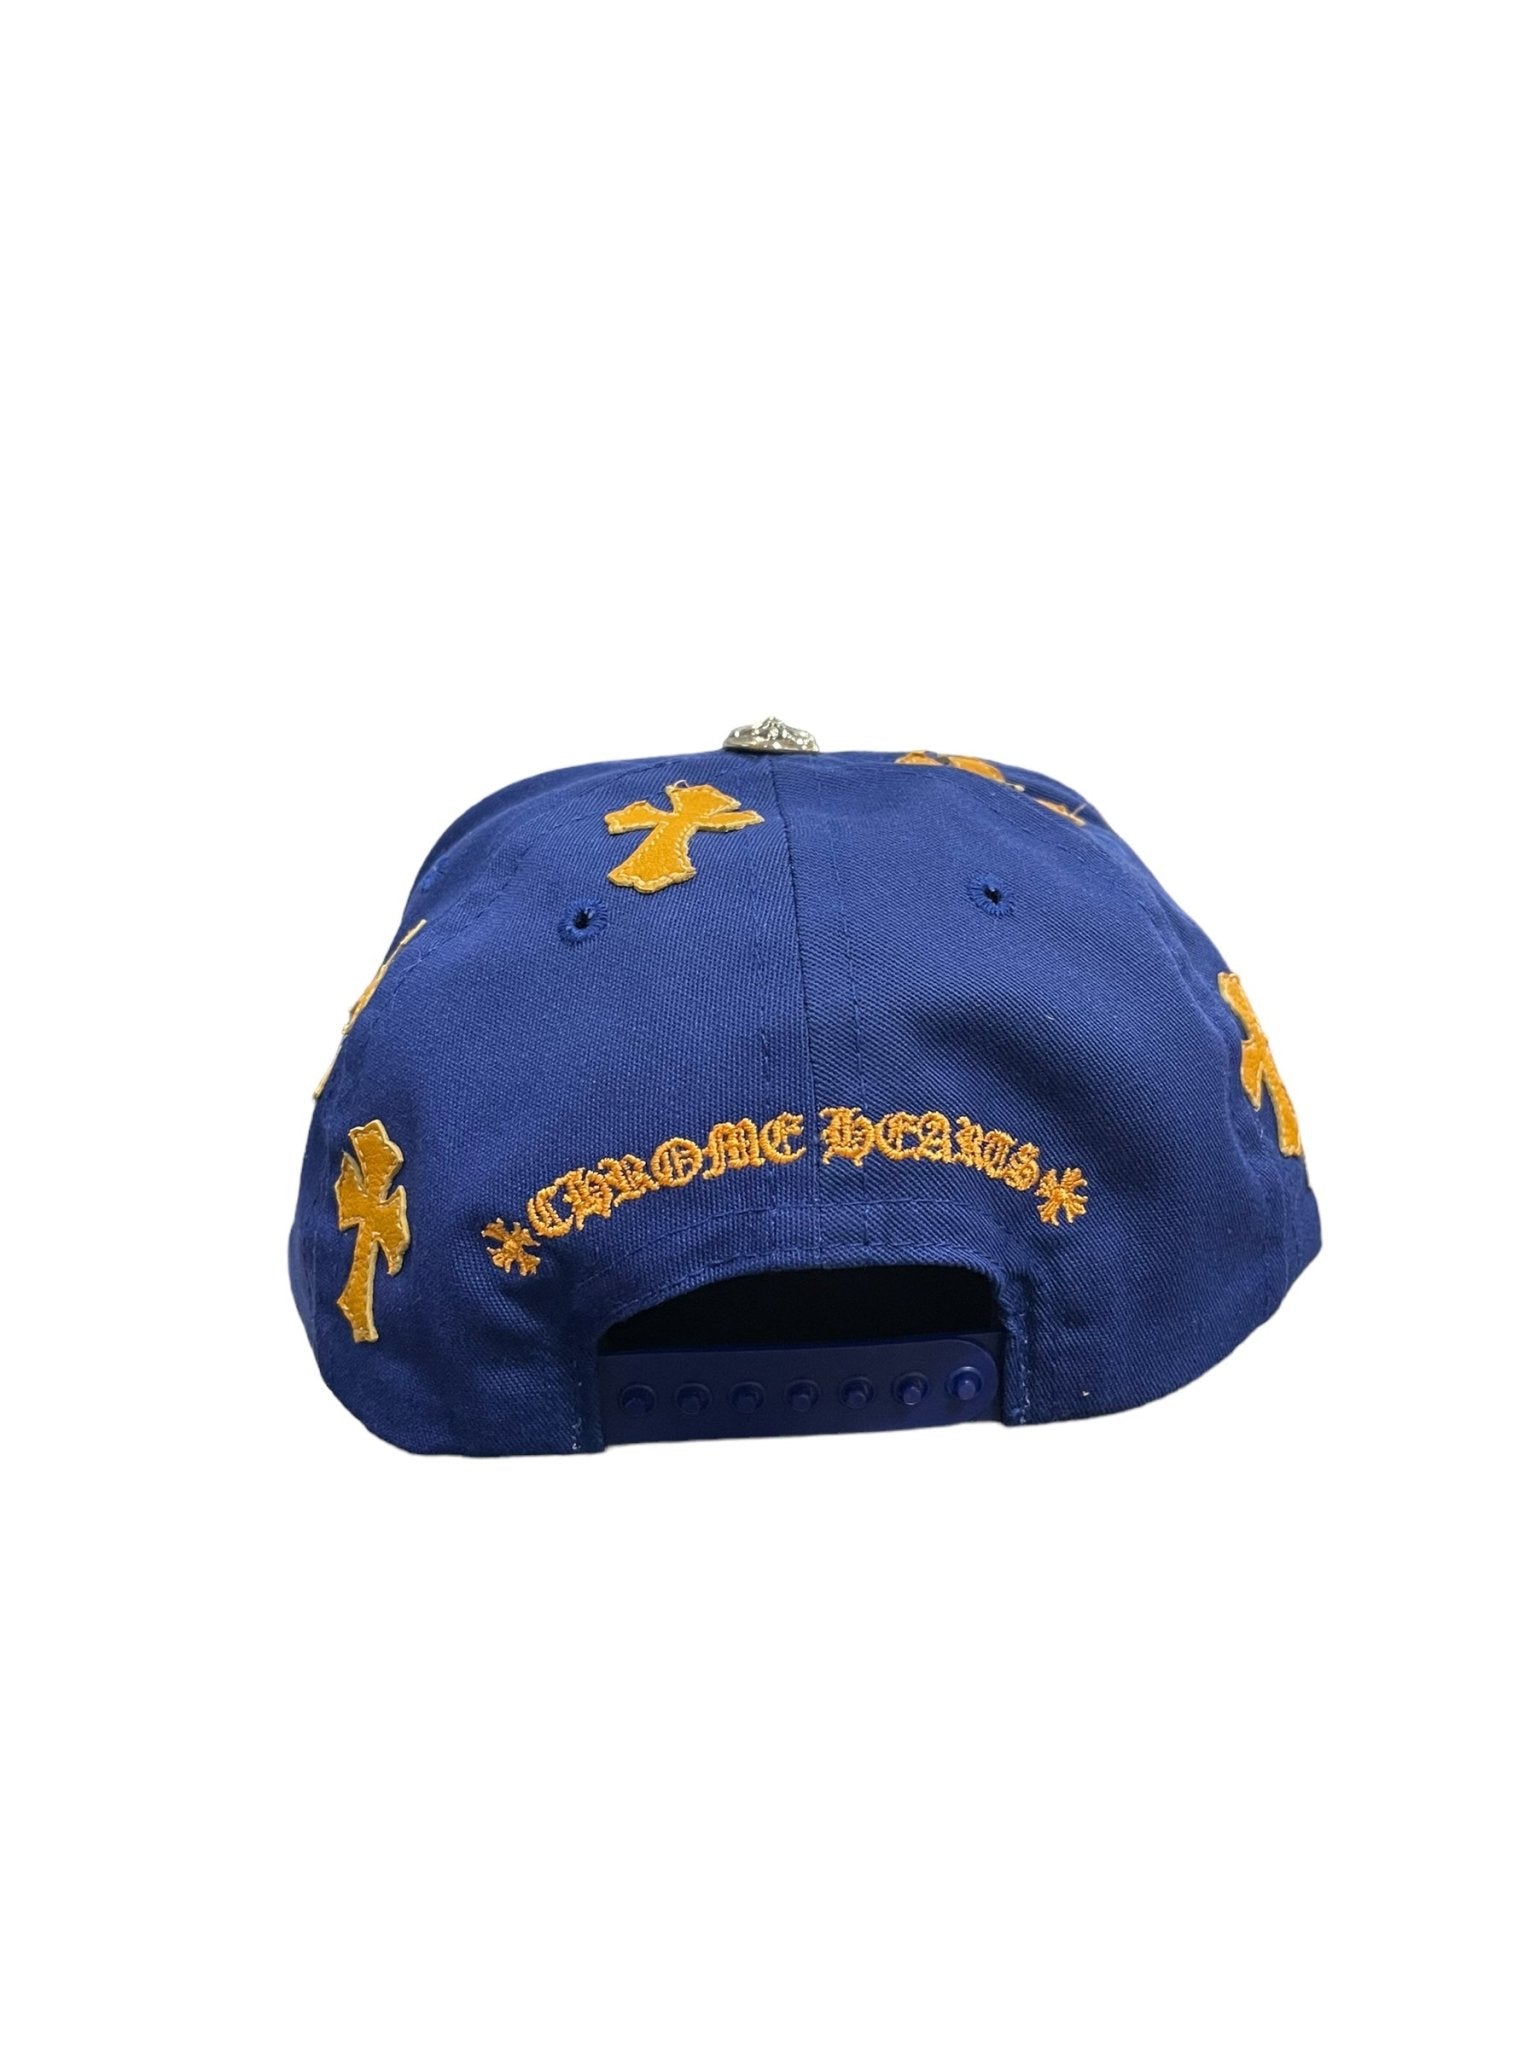 Chrome Hearts Leather Patches Snapback Hat Blue / Yellow - Supra Sneakers